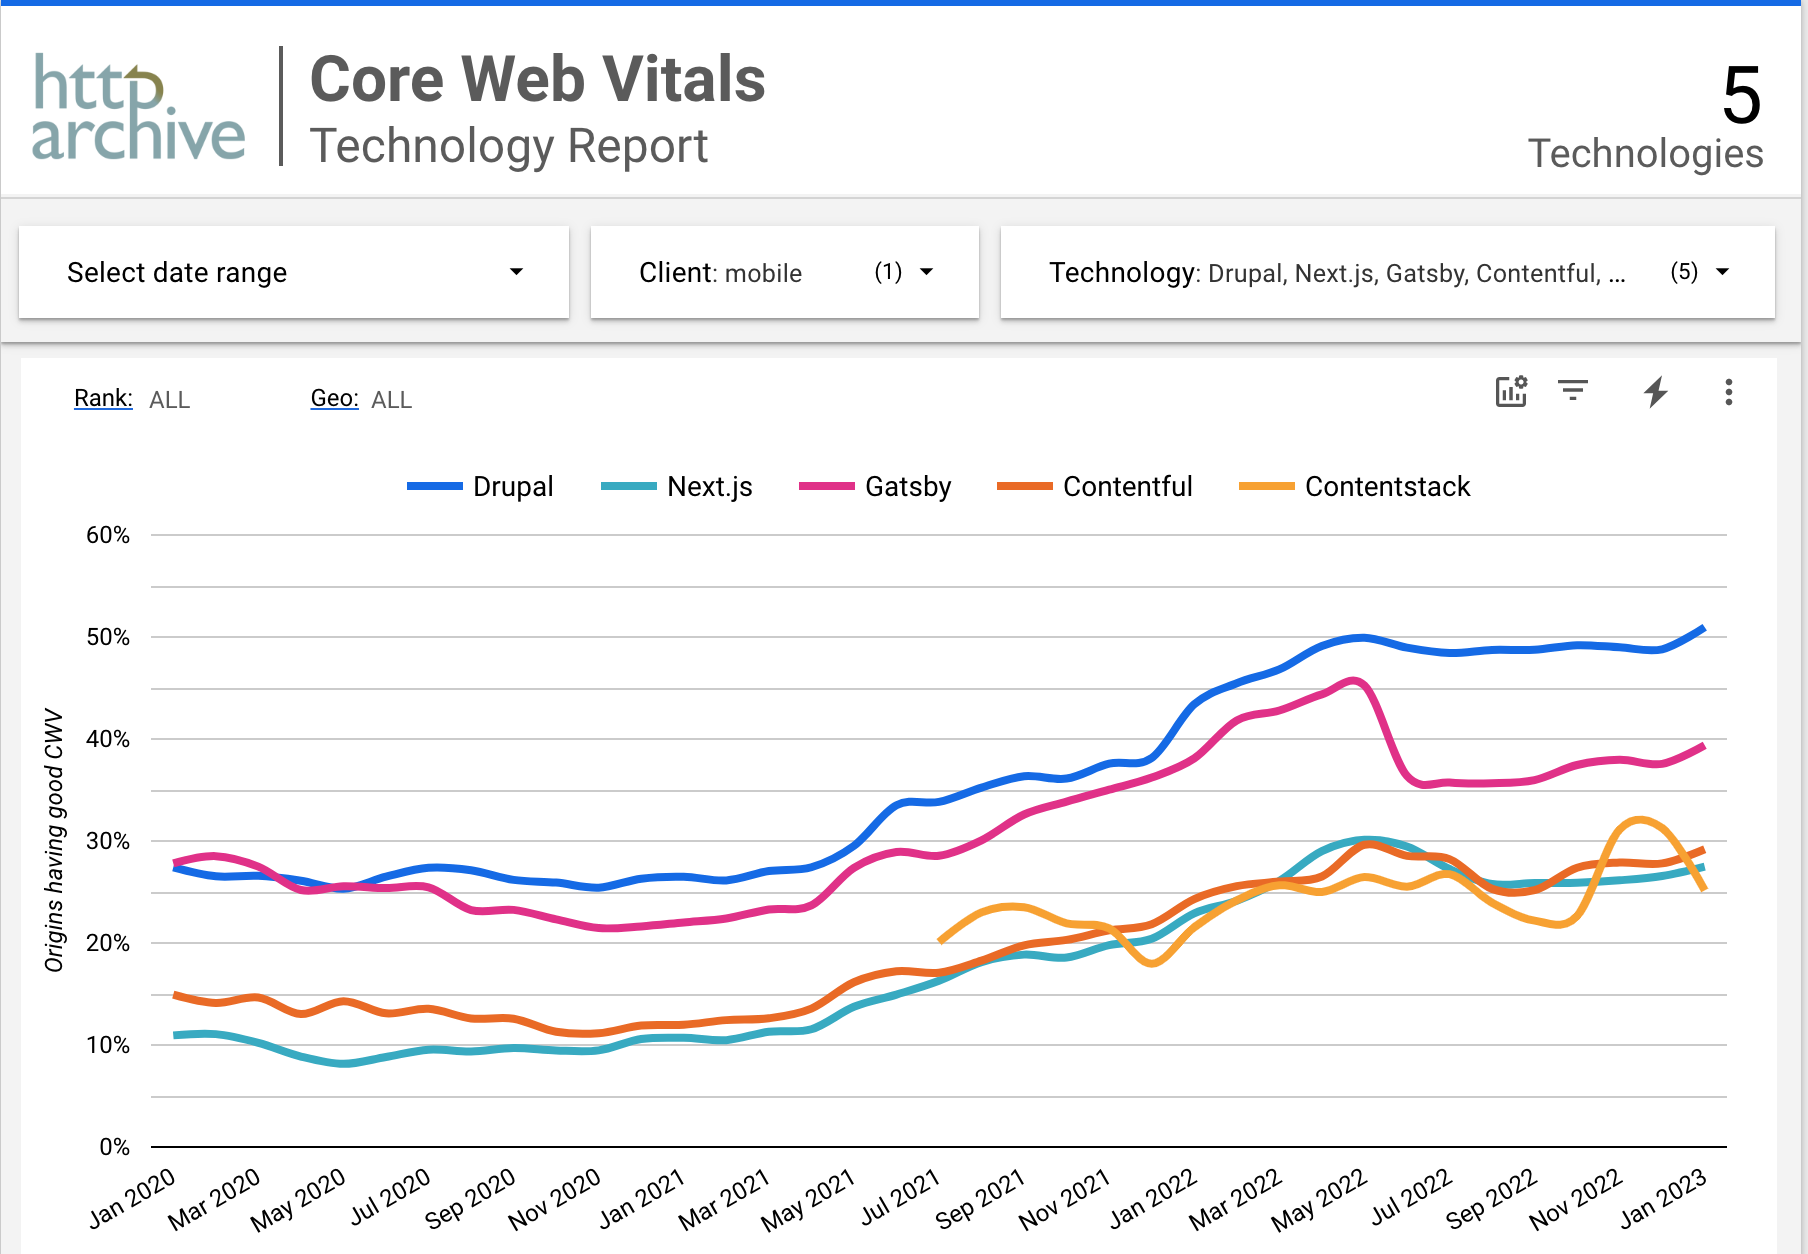 A Core Web Vitals report showing Drupal far ahead of Contentful and Contentstack, and also ahead of Next.js and Gatsby